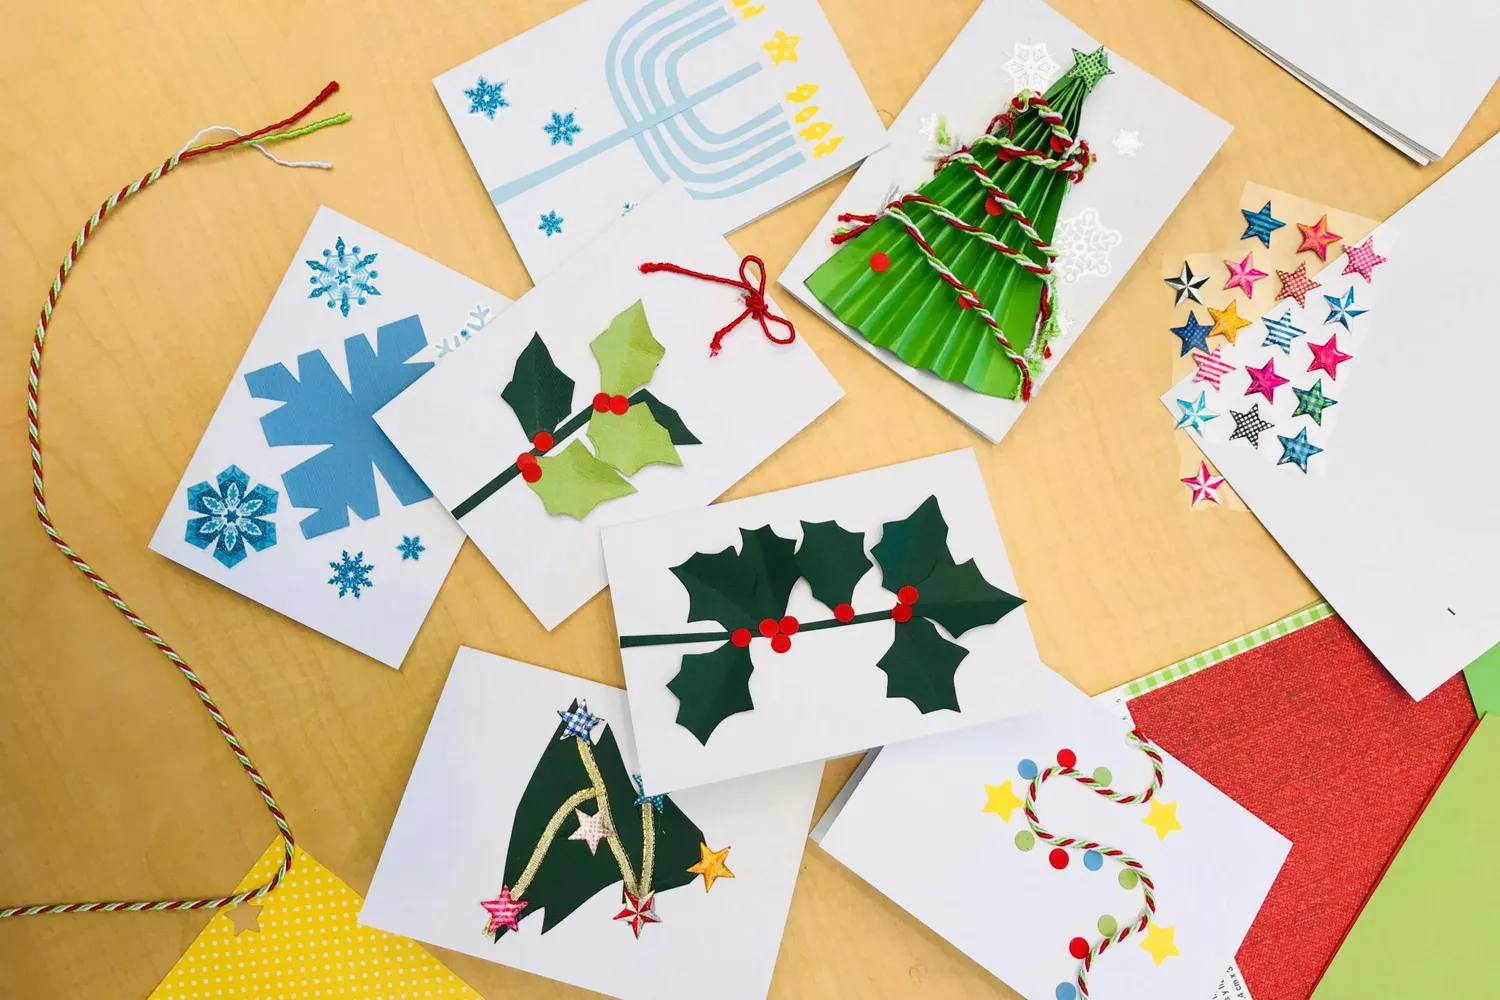 6 Organizations That Will Help You Send Homemade Holiday Cards to Kids Who Need Them